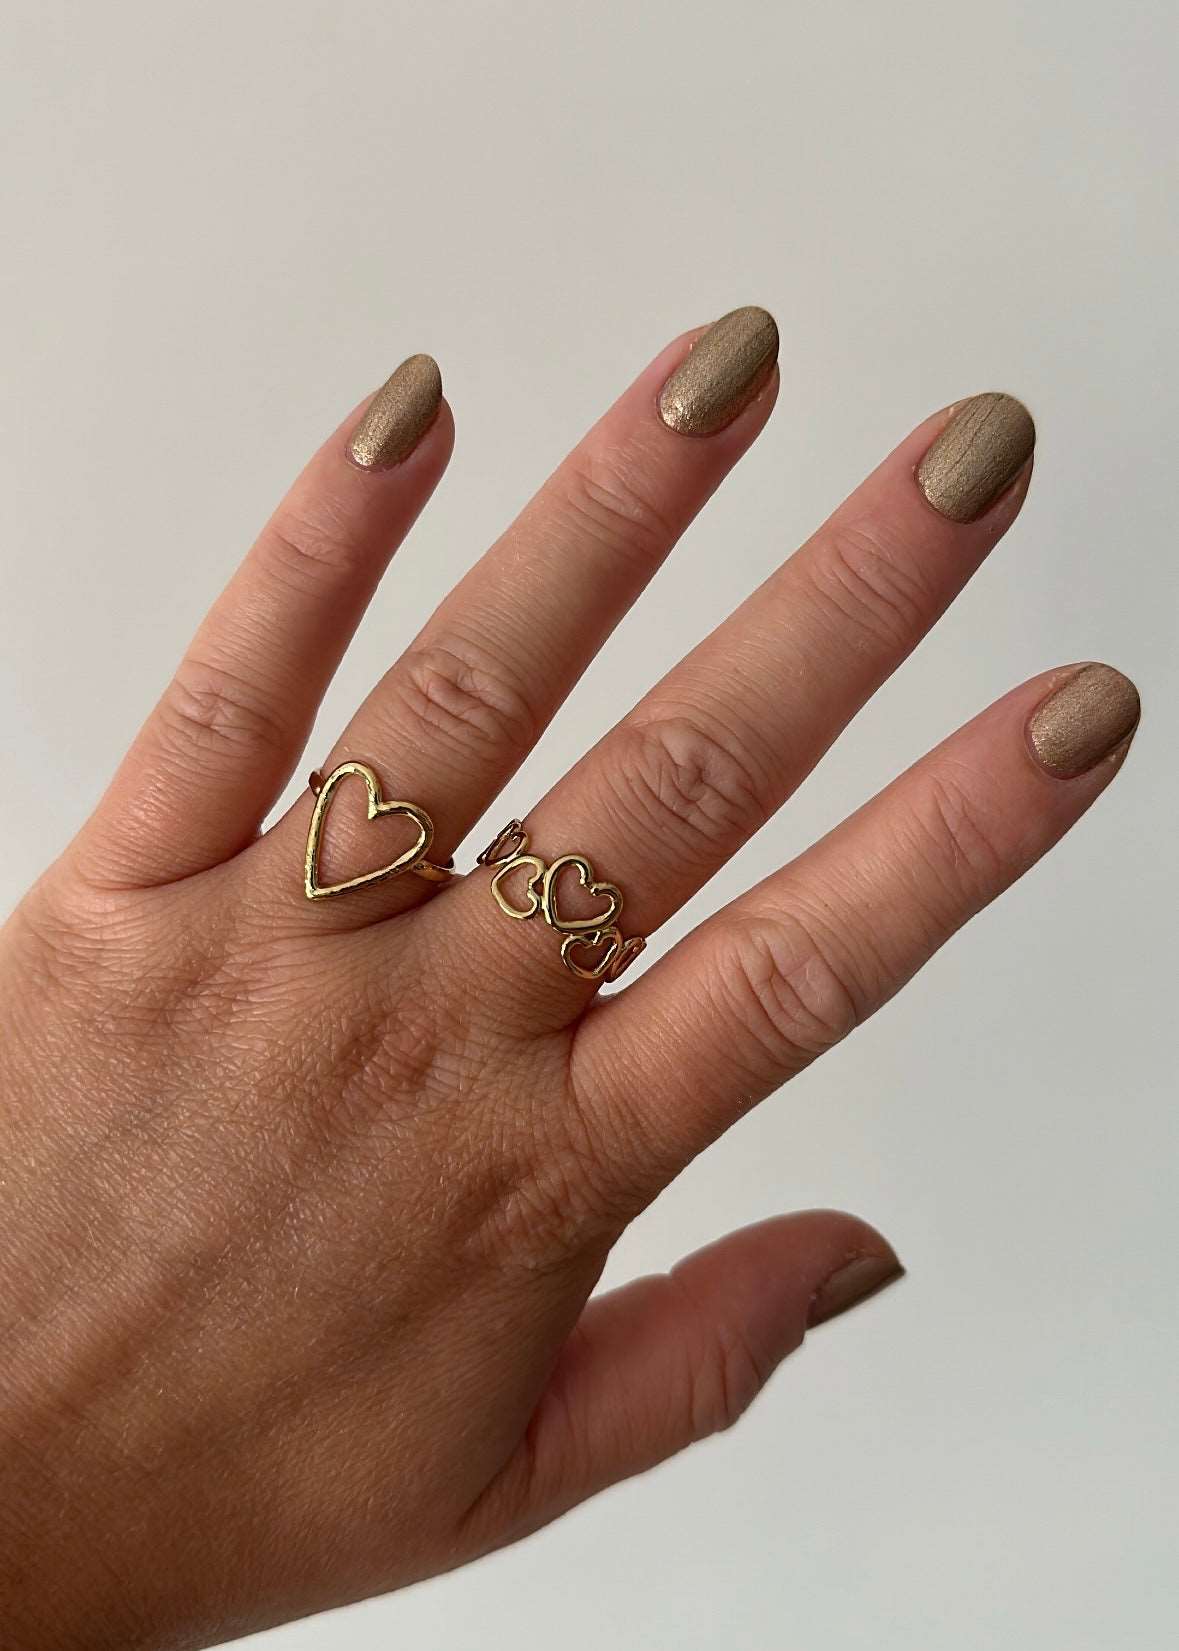 Eva ring hartjes goud - Styles And More